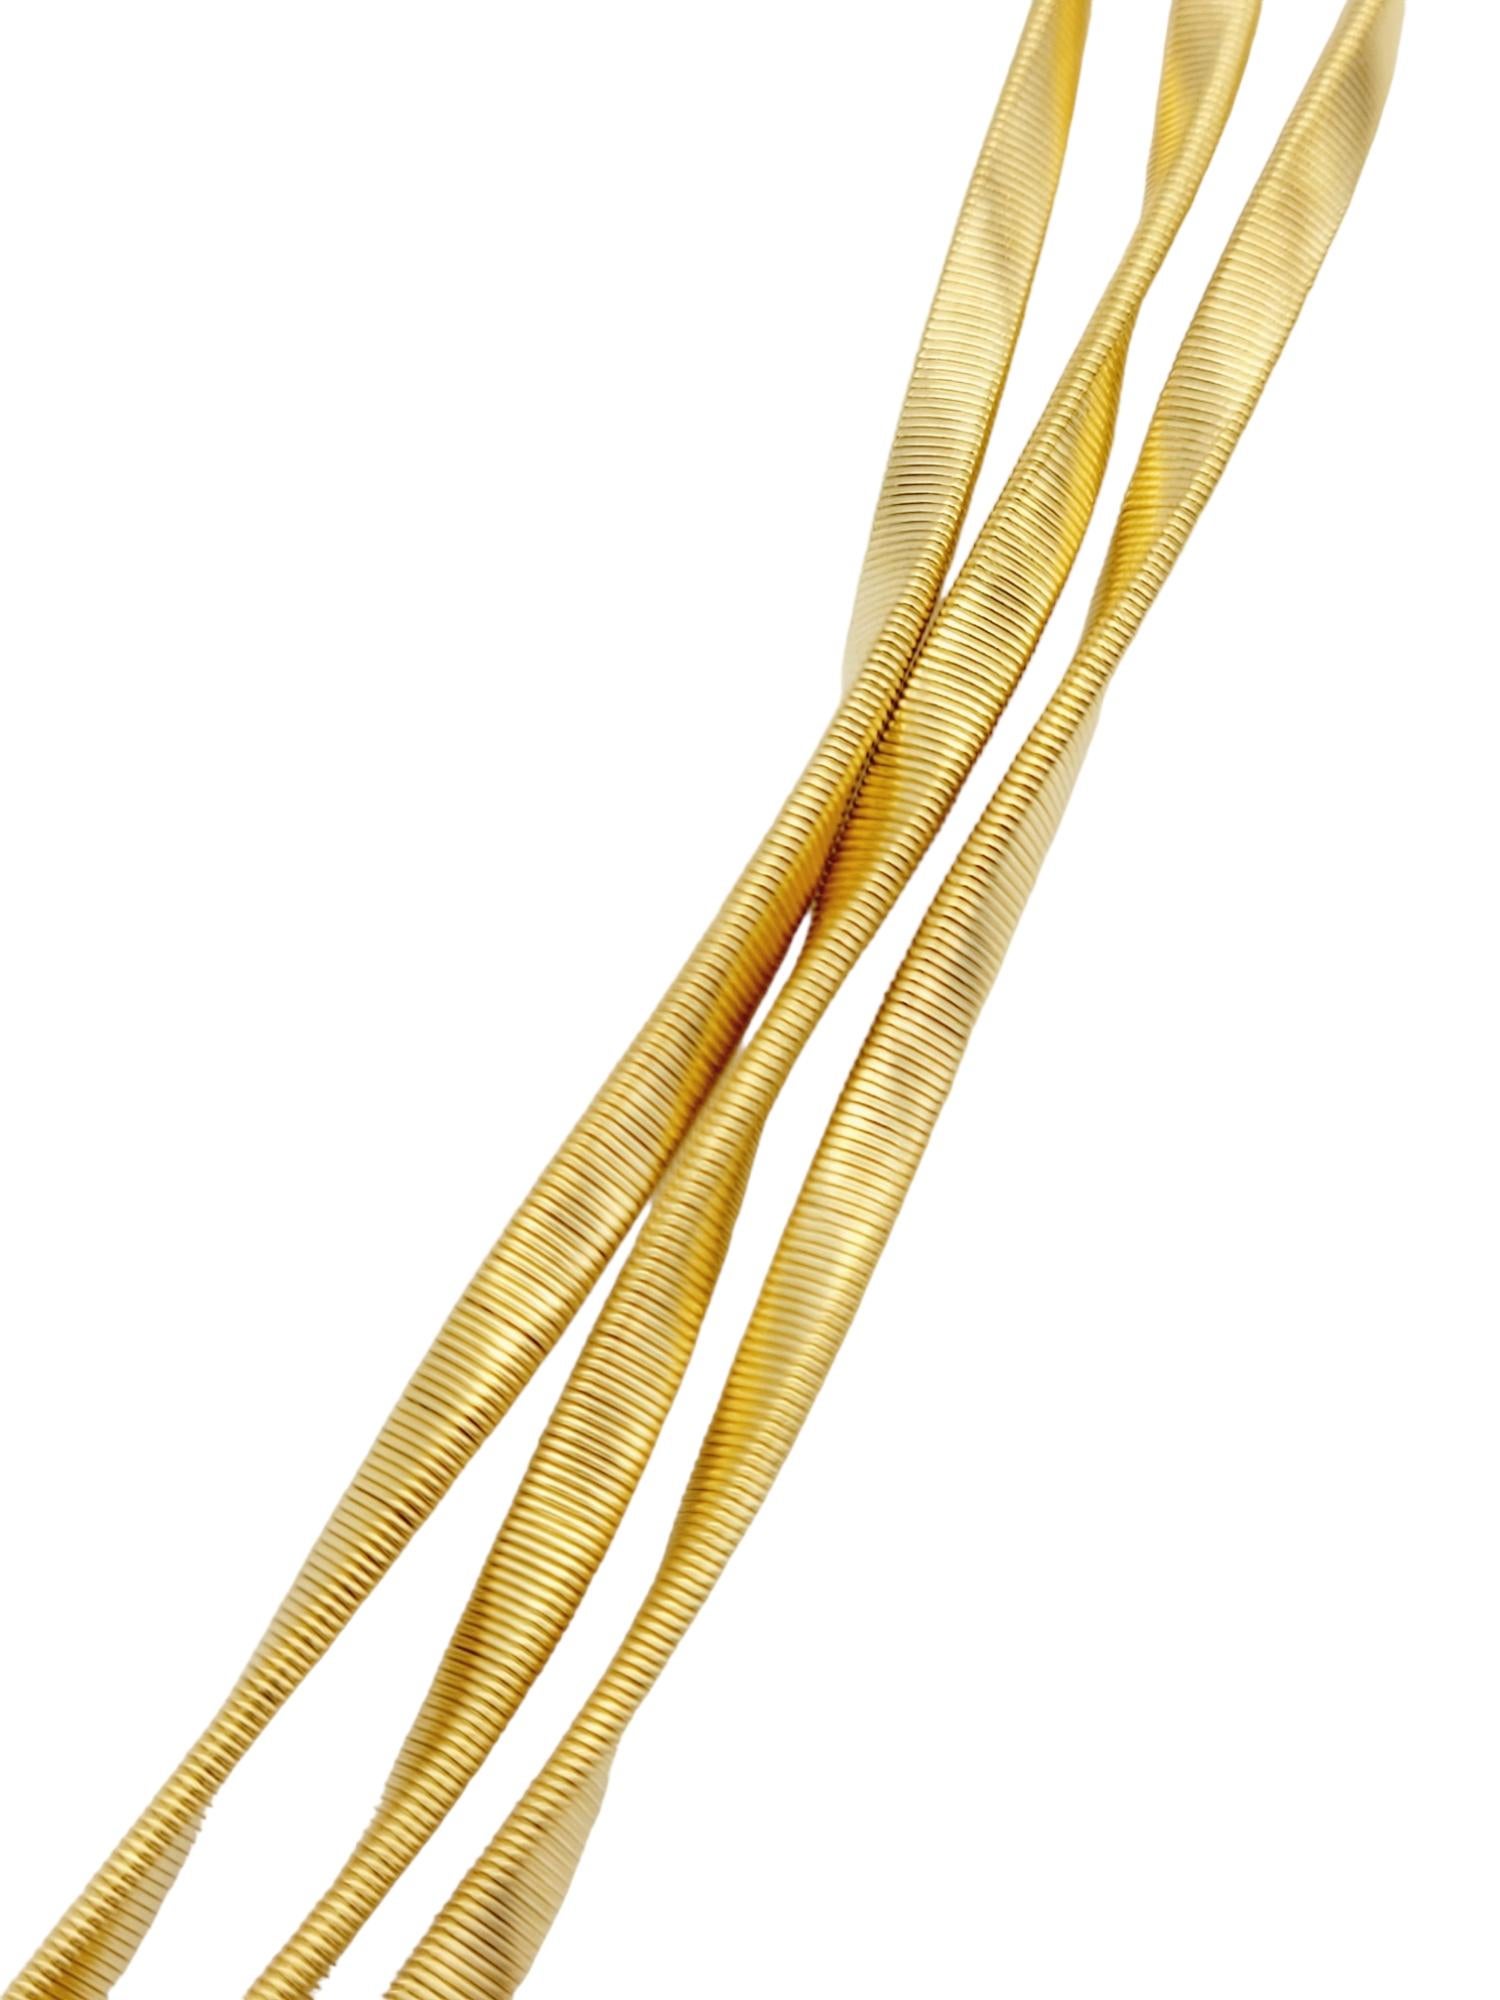 MarCo Bicego Marrakech Collection Three-Strand Necklace in 18 Karat Yellow Gold In Good Condition For Sale In Scottsdale, AZ